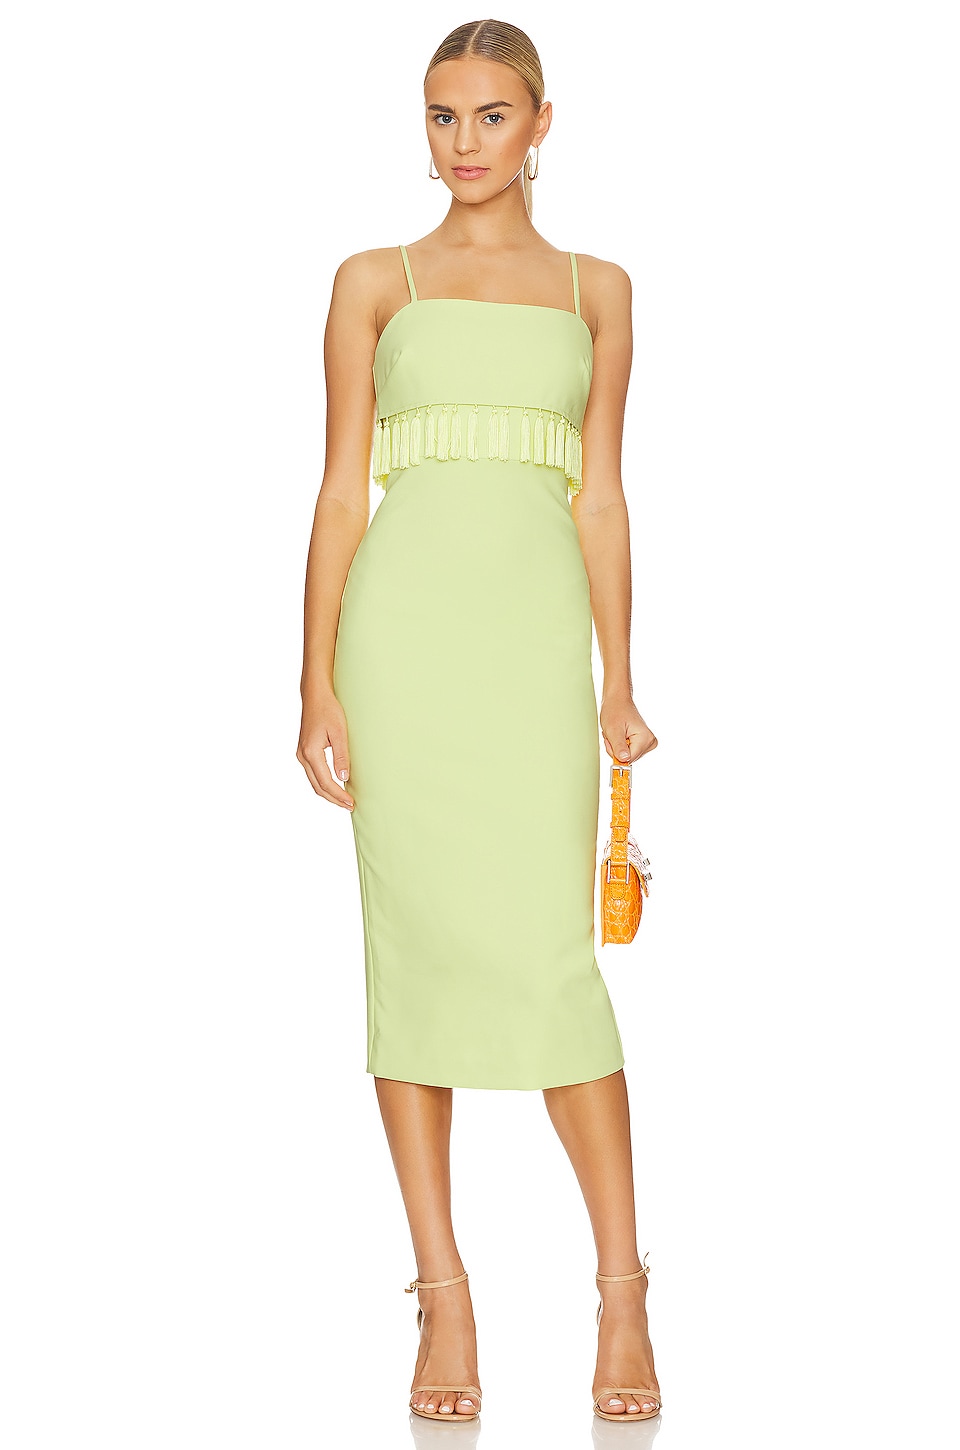 LIKELY Paola Dress in Lime Sherbet